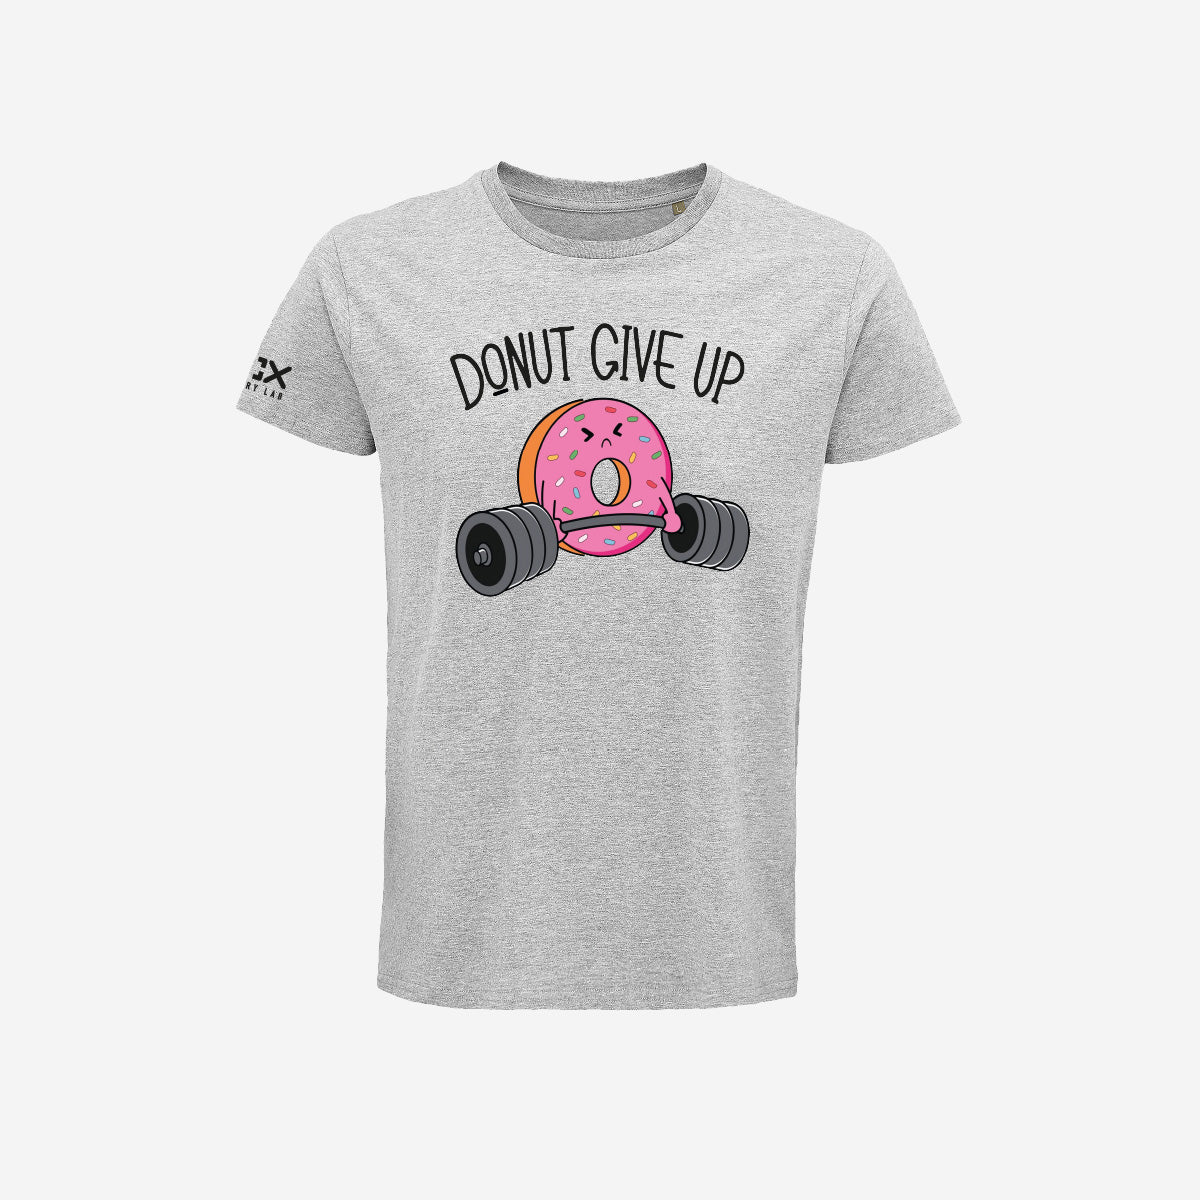 T-shirt Uomo - Donut give up